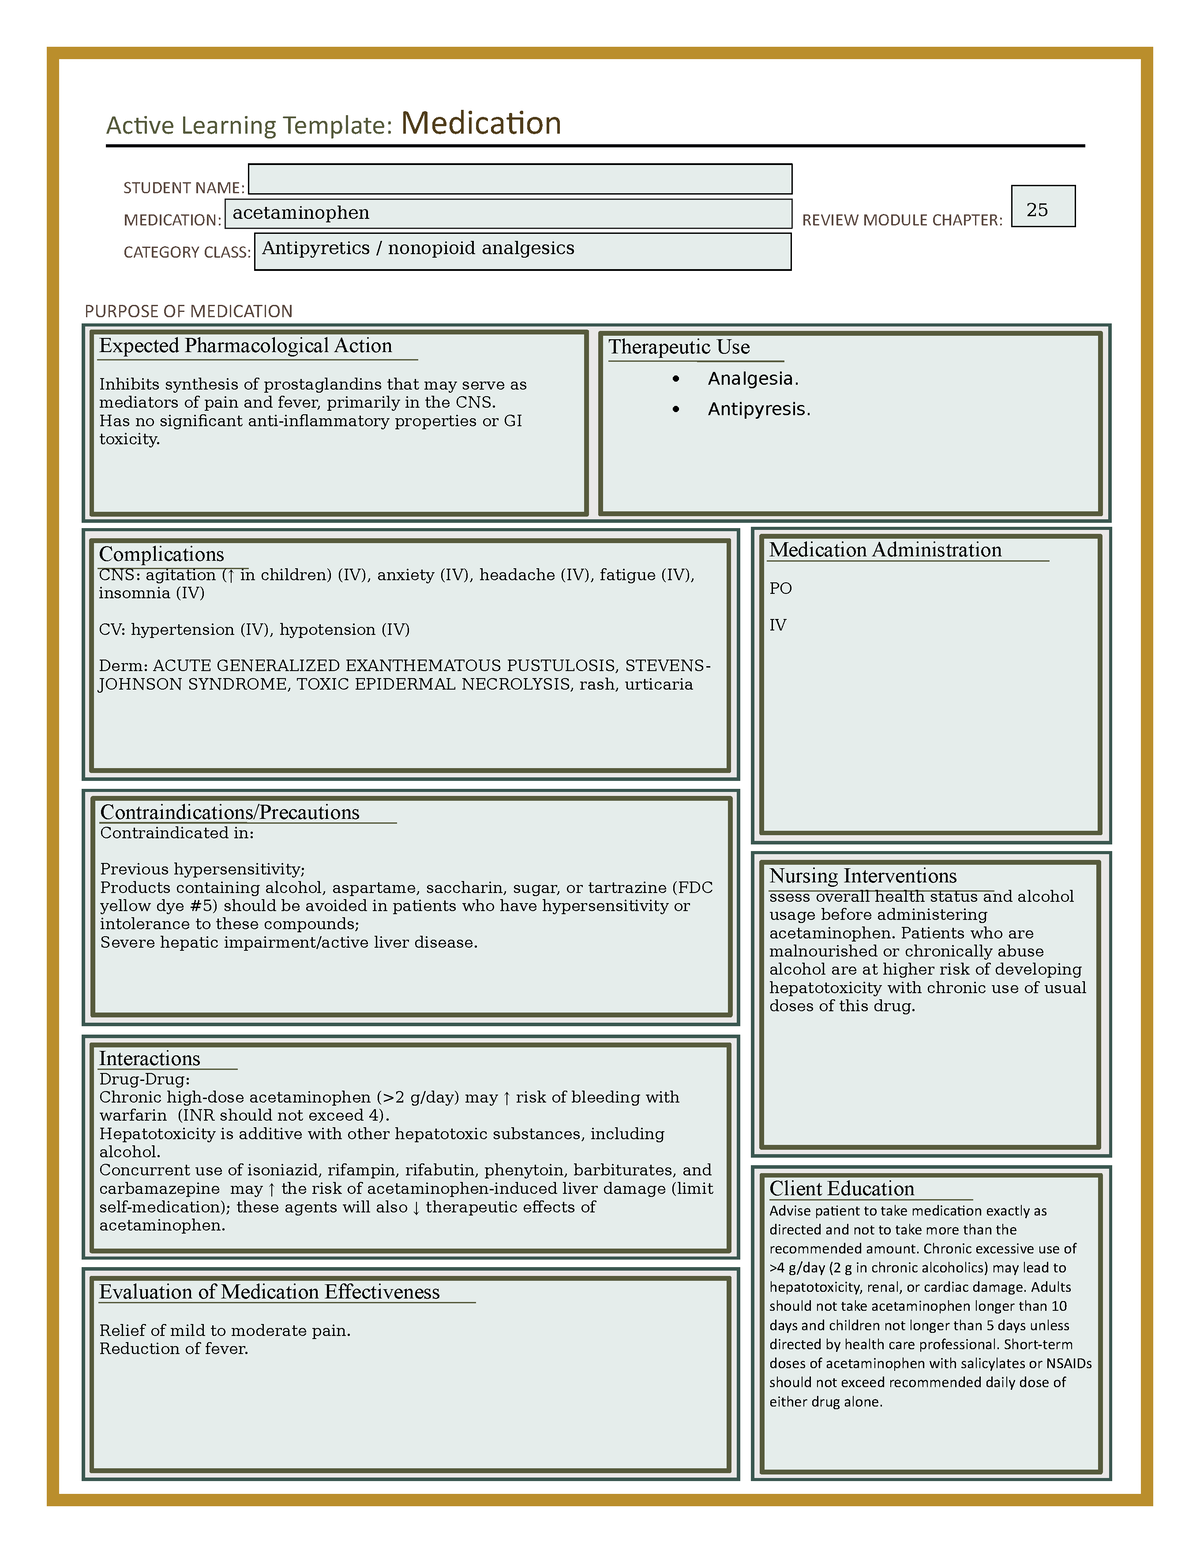 ati-medication-template-acetaminophen-active-learning-template-medication-student-name